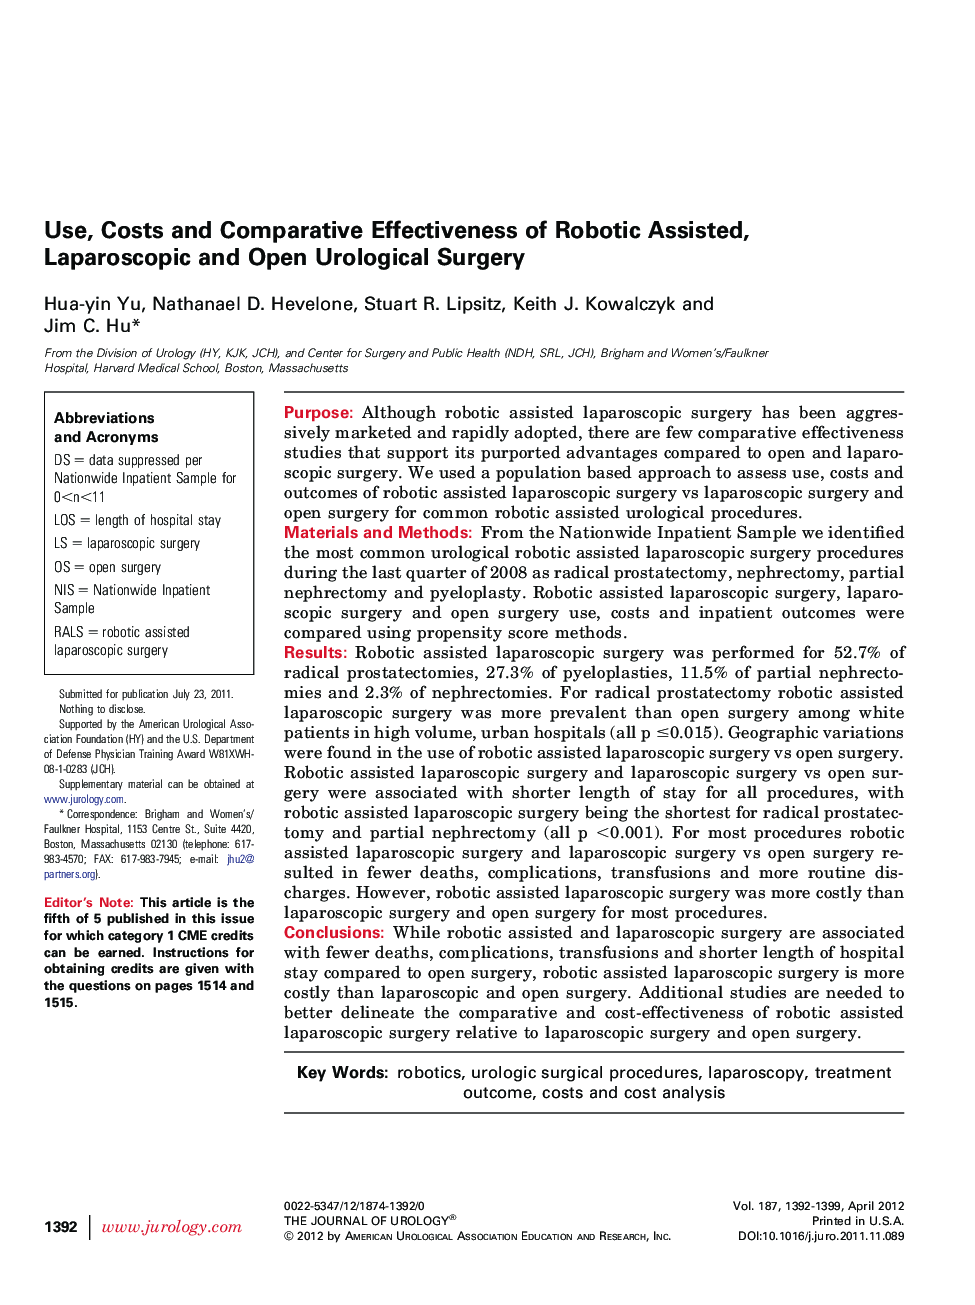 Use, Costs and Comparative Effectiveness of Robotic Assisted, Laparoscopic and Open Urological Surgery 